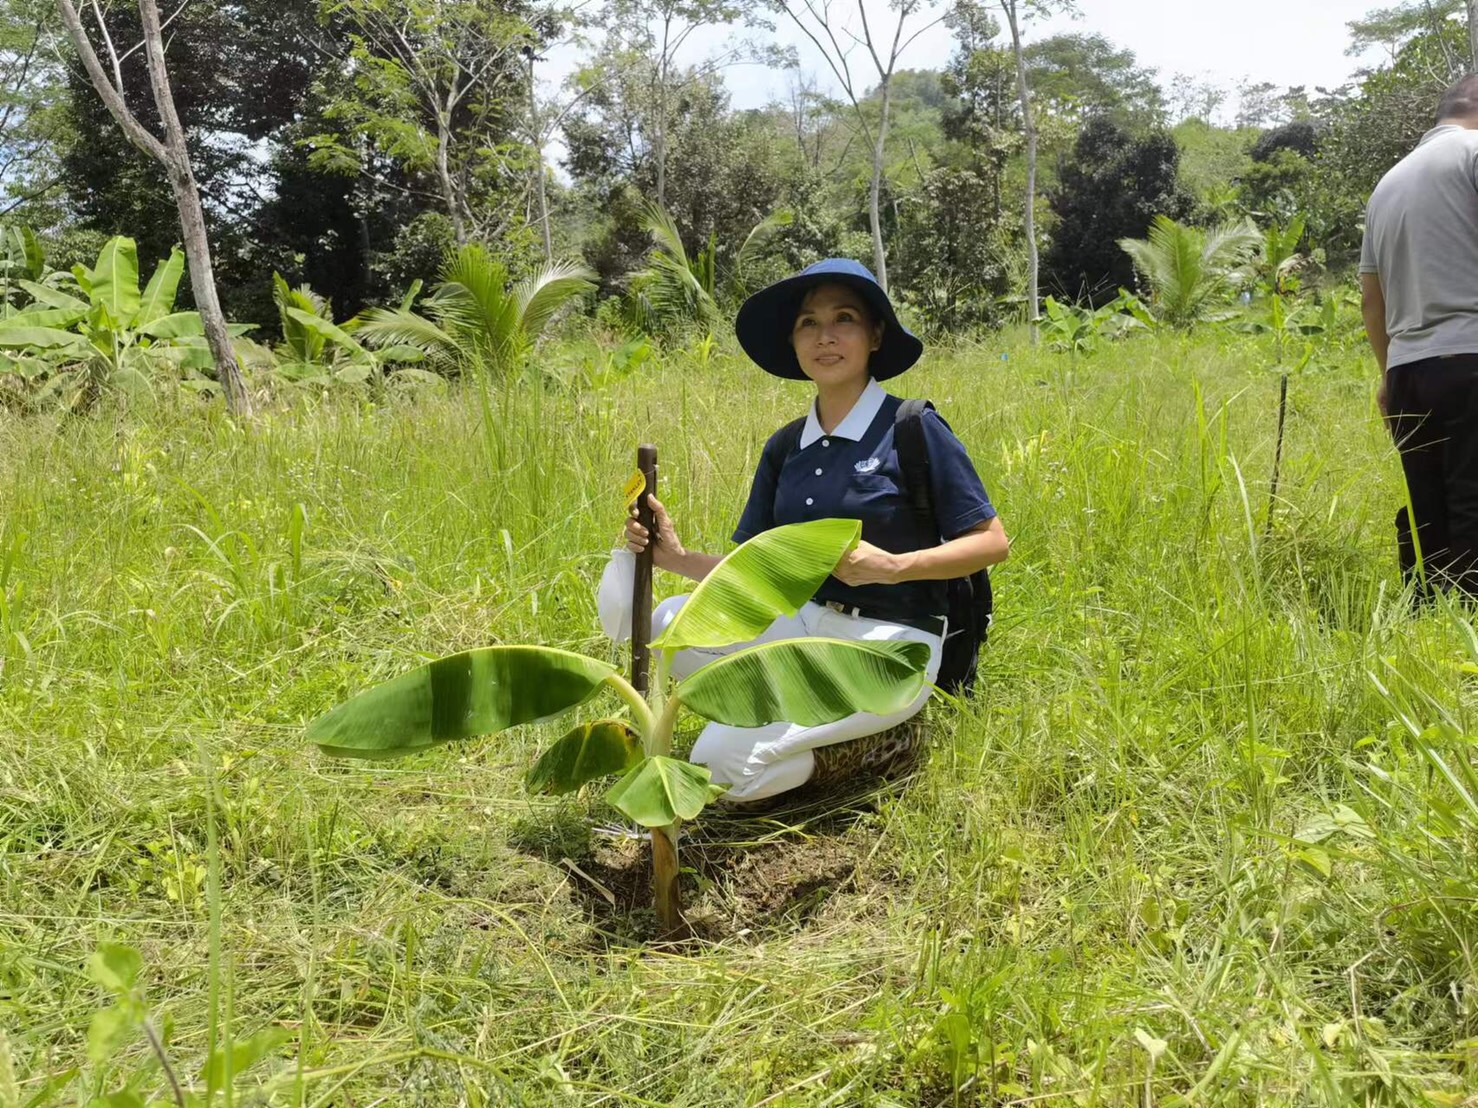 Volunteer poses for a phot with a growing banana tree, planted three months ago.